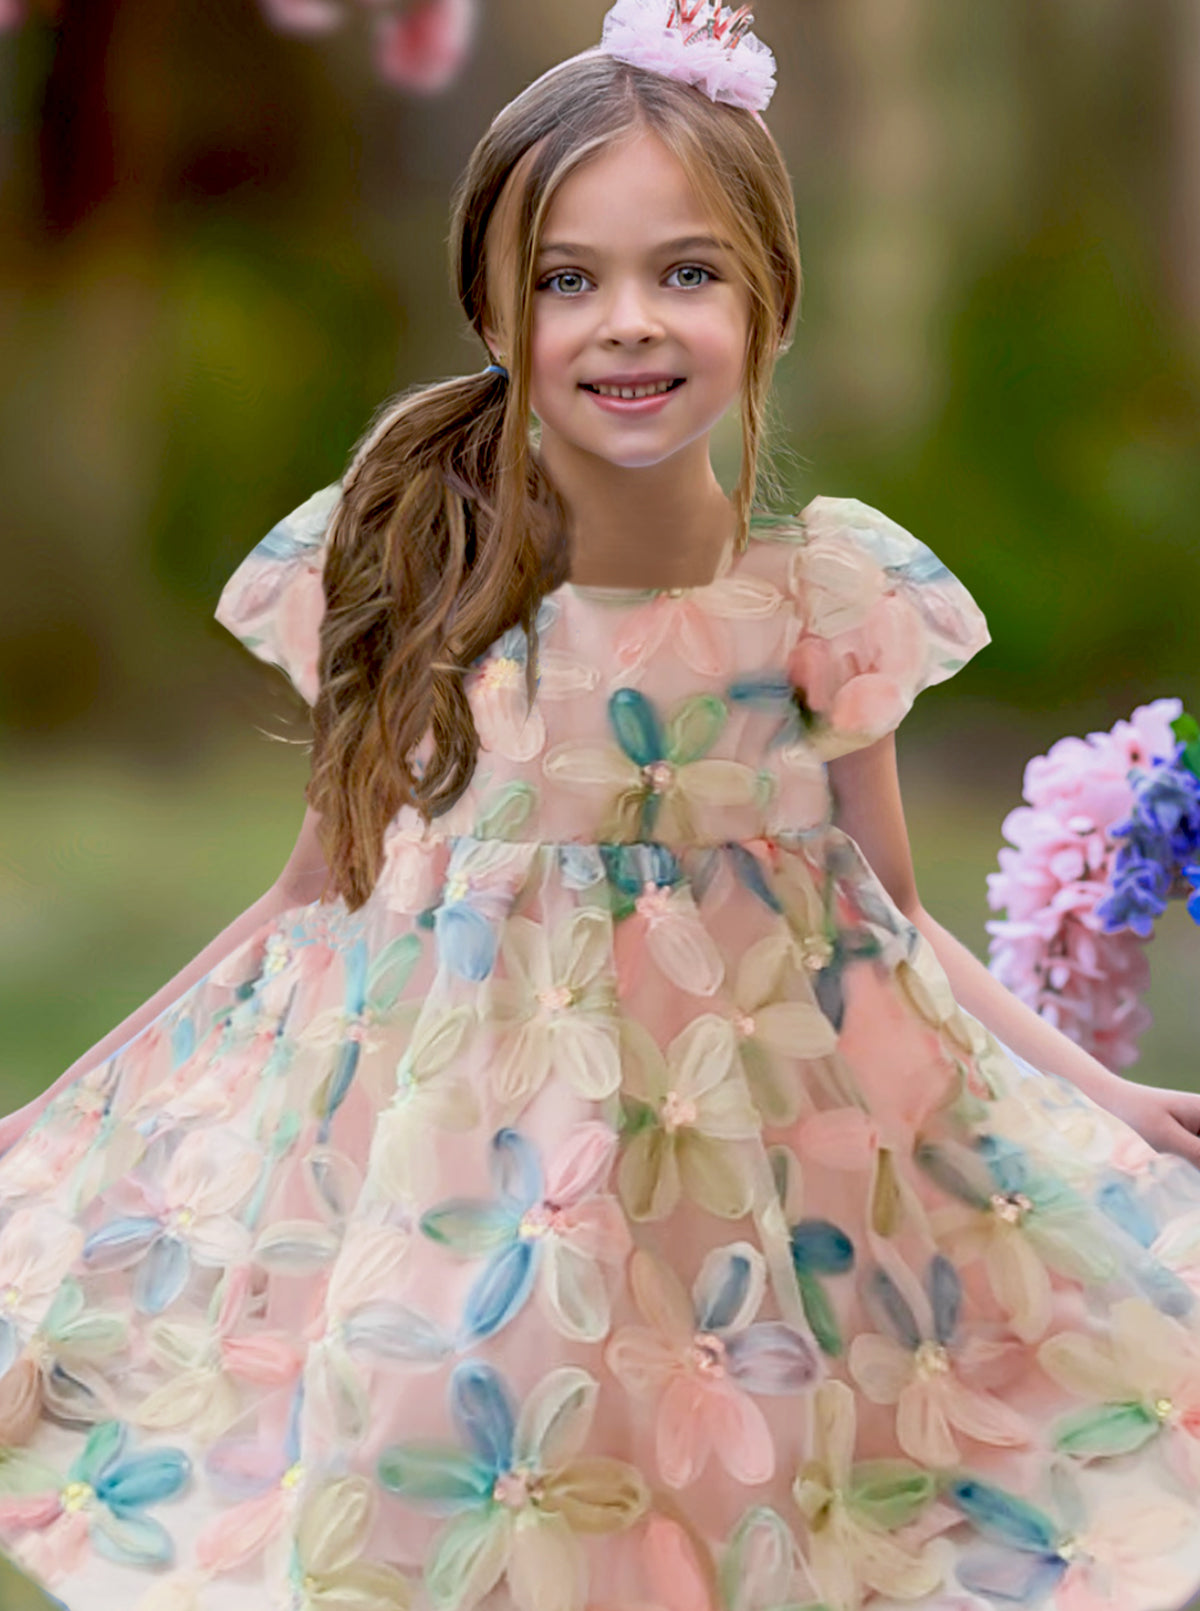 Spread More Magic Floral Tulle Dress